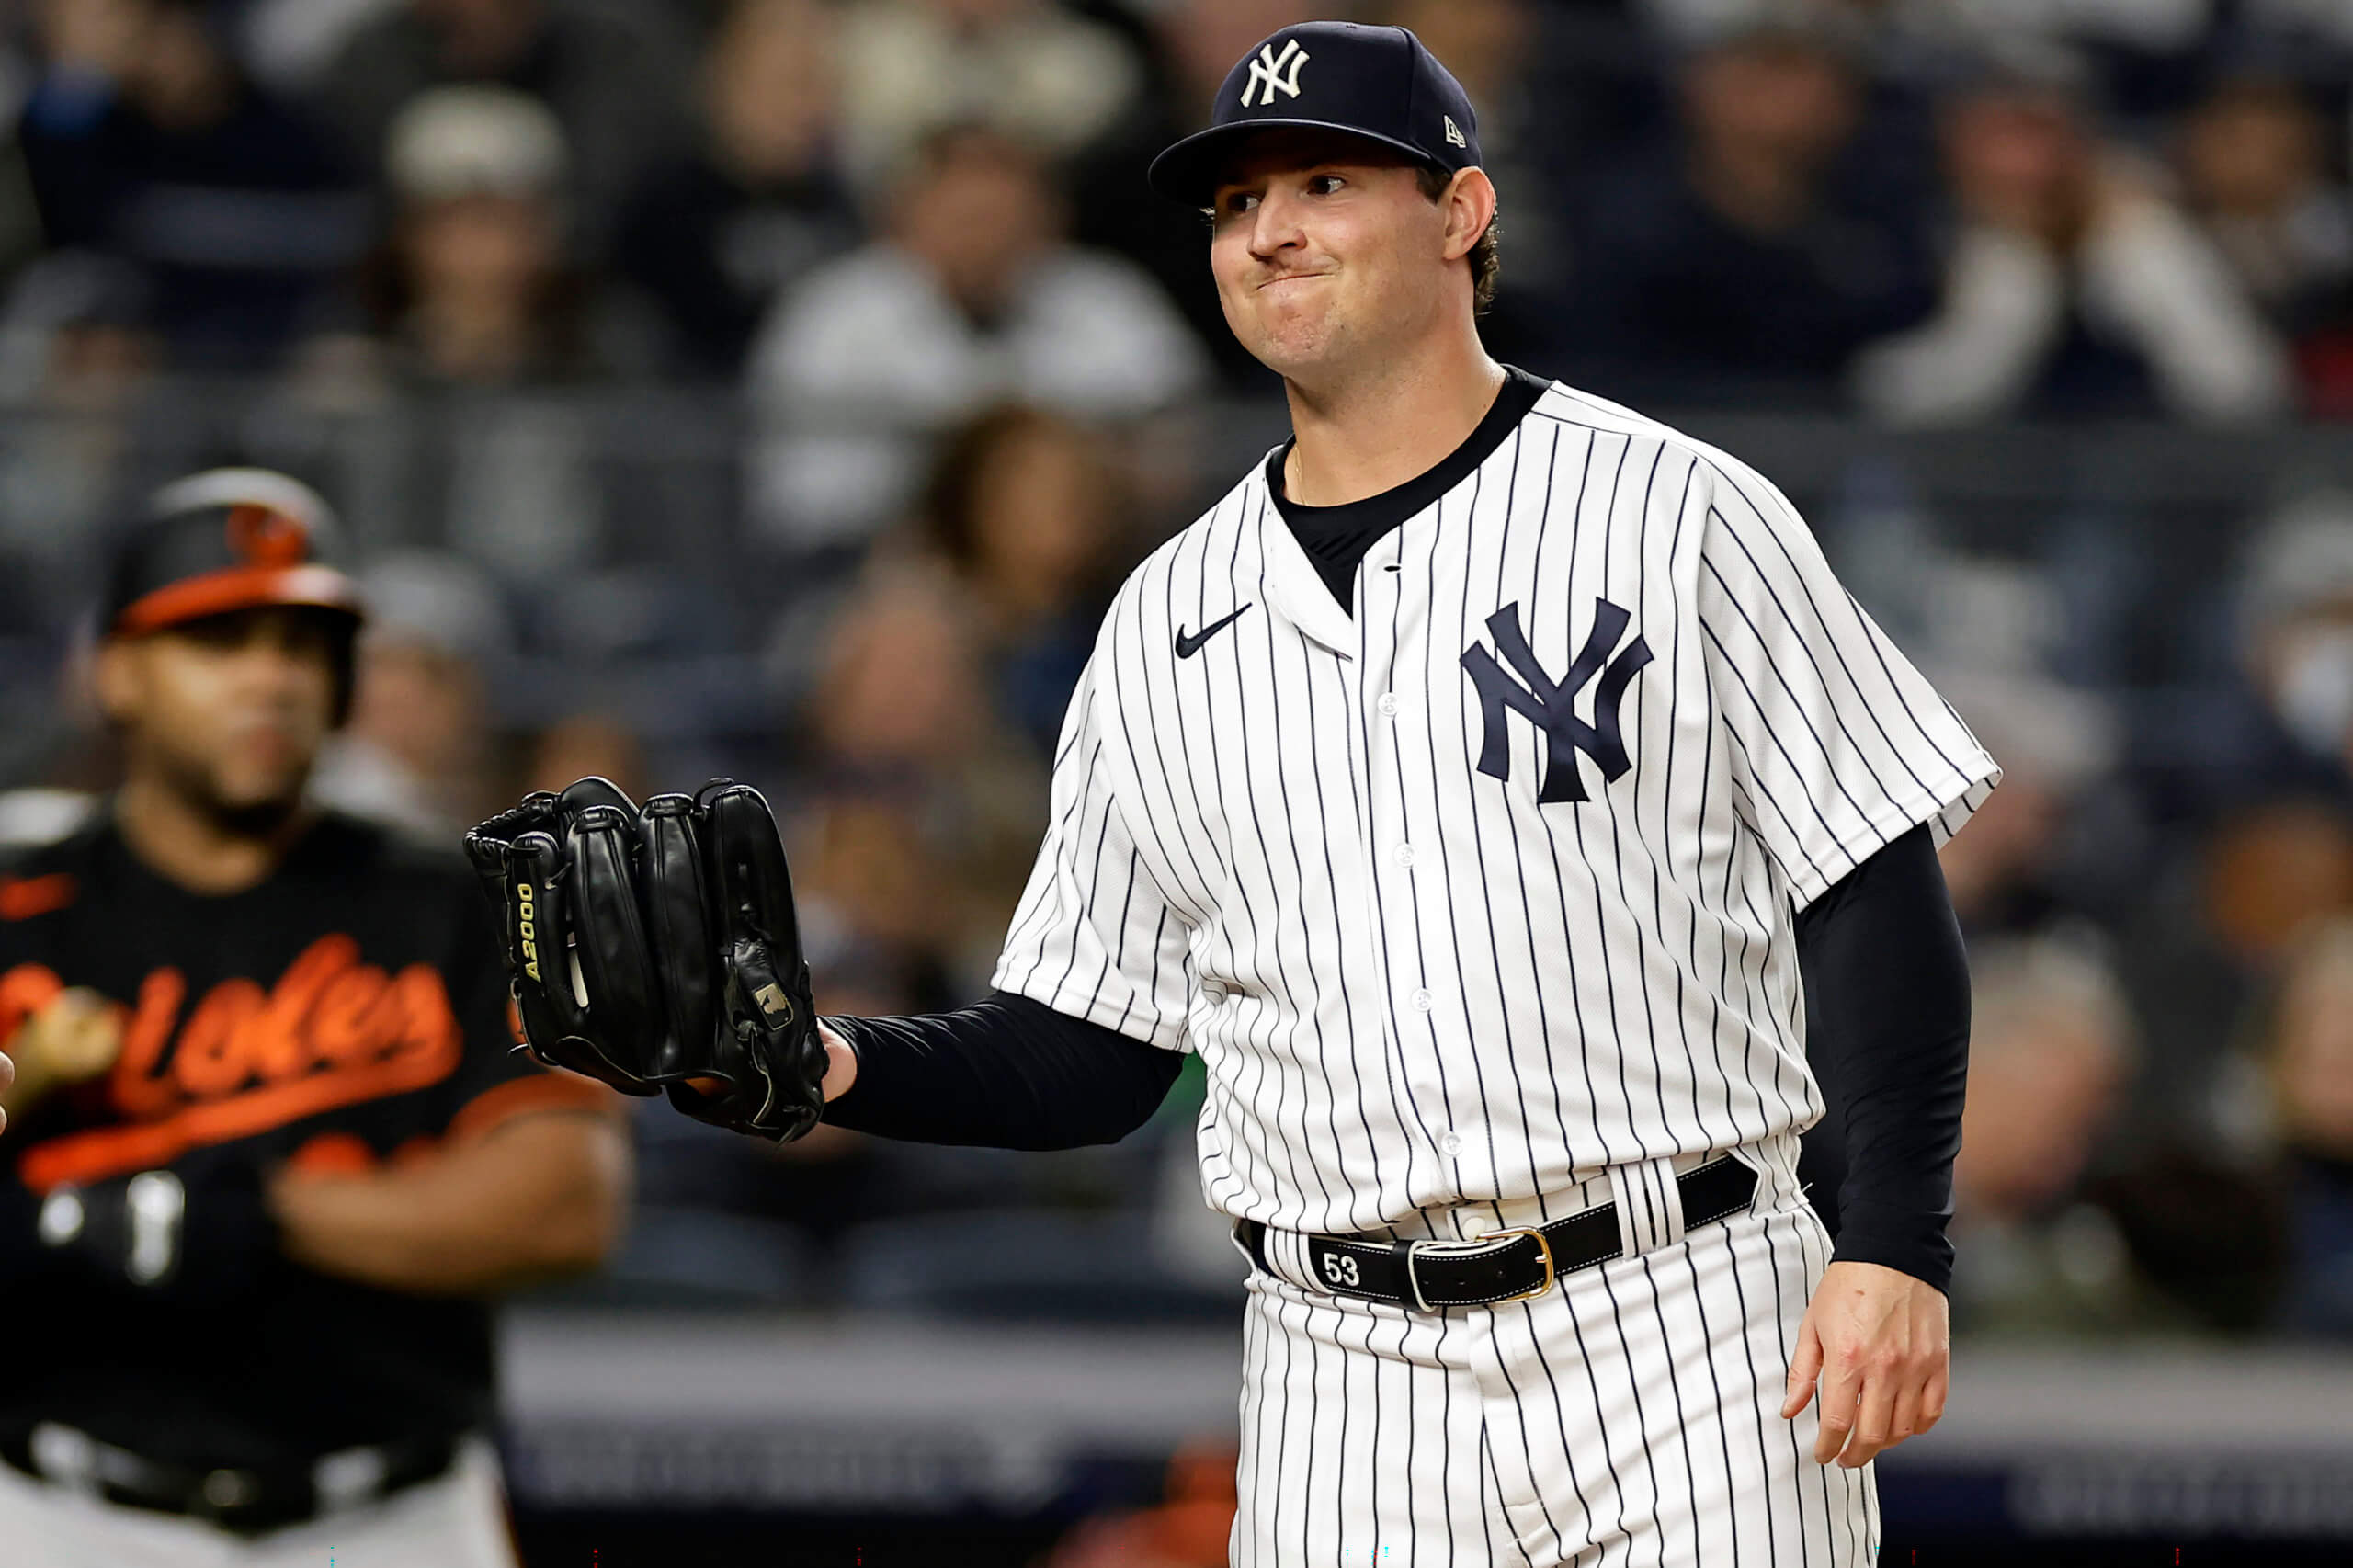 Brendan Burke emerging as ideal replacement for John Sterling as Yankees  lead announcer in near future